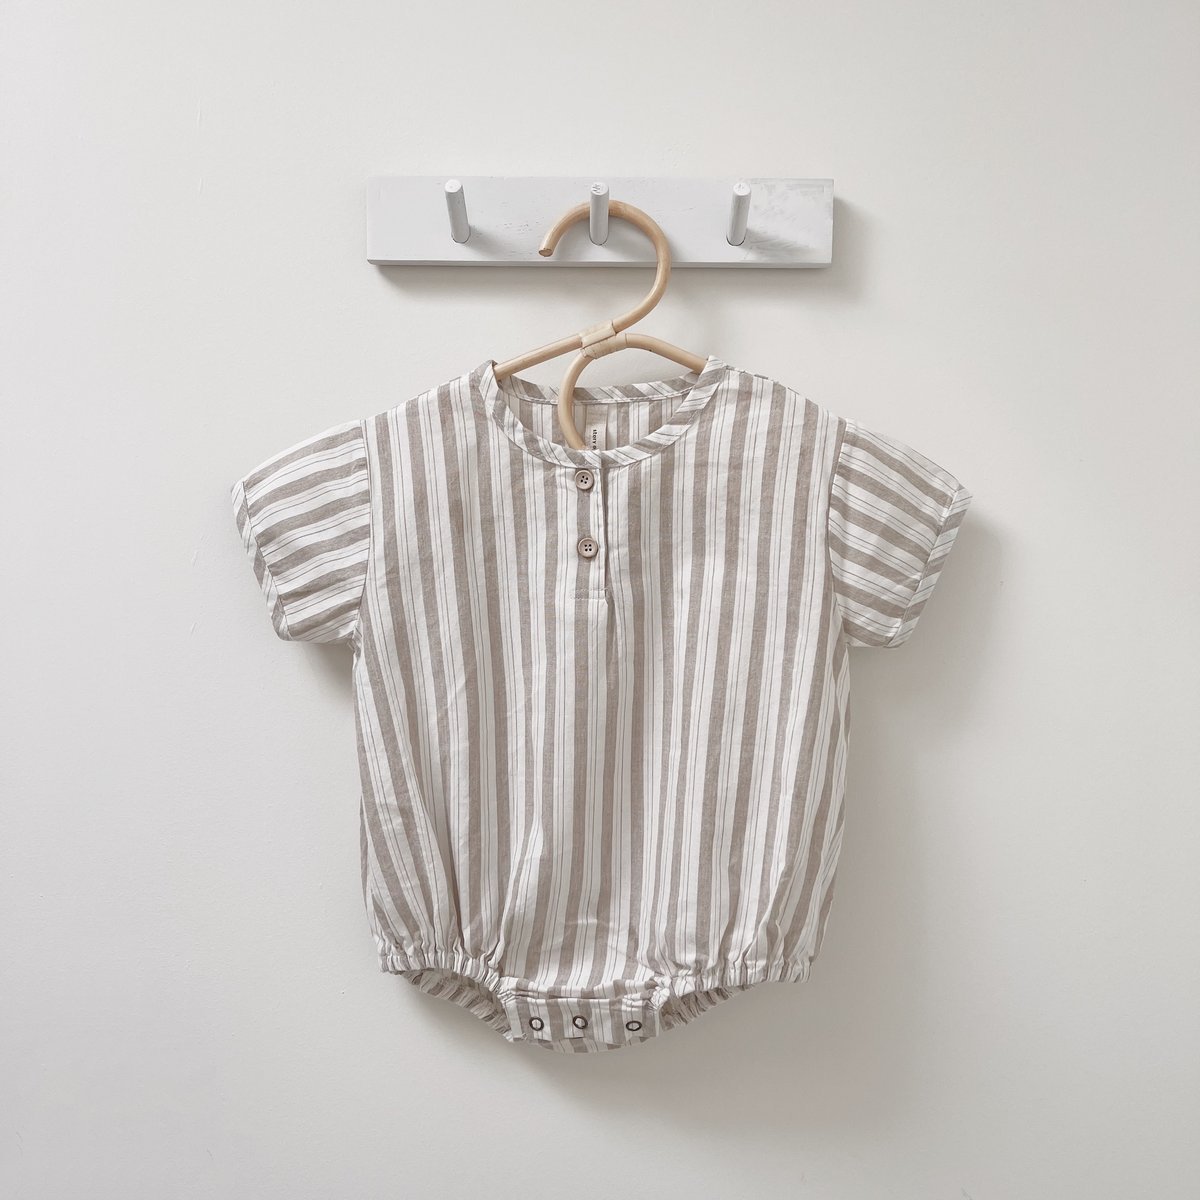 Plaid Bodysuit - Check find Stylish Fashion for Little People- at Little Foxx Concept Store